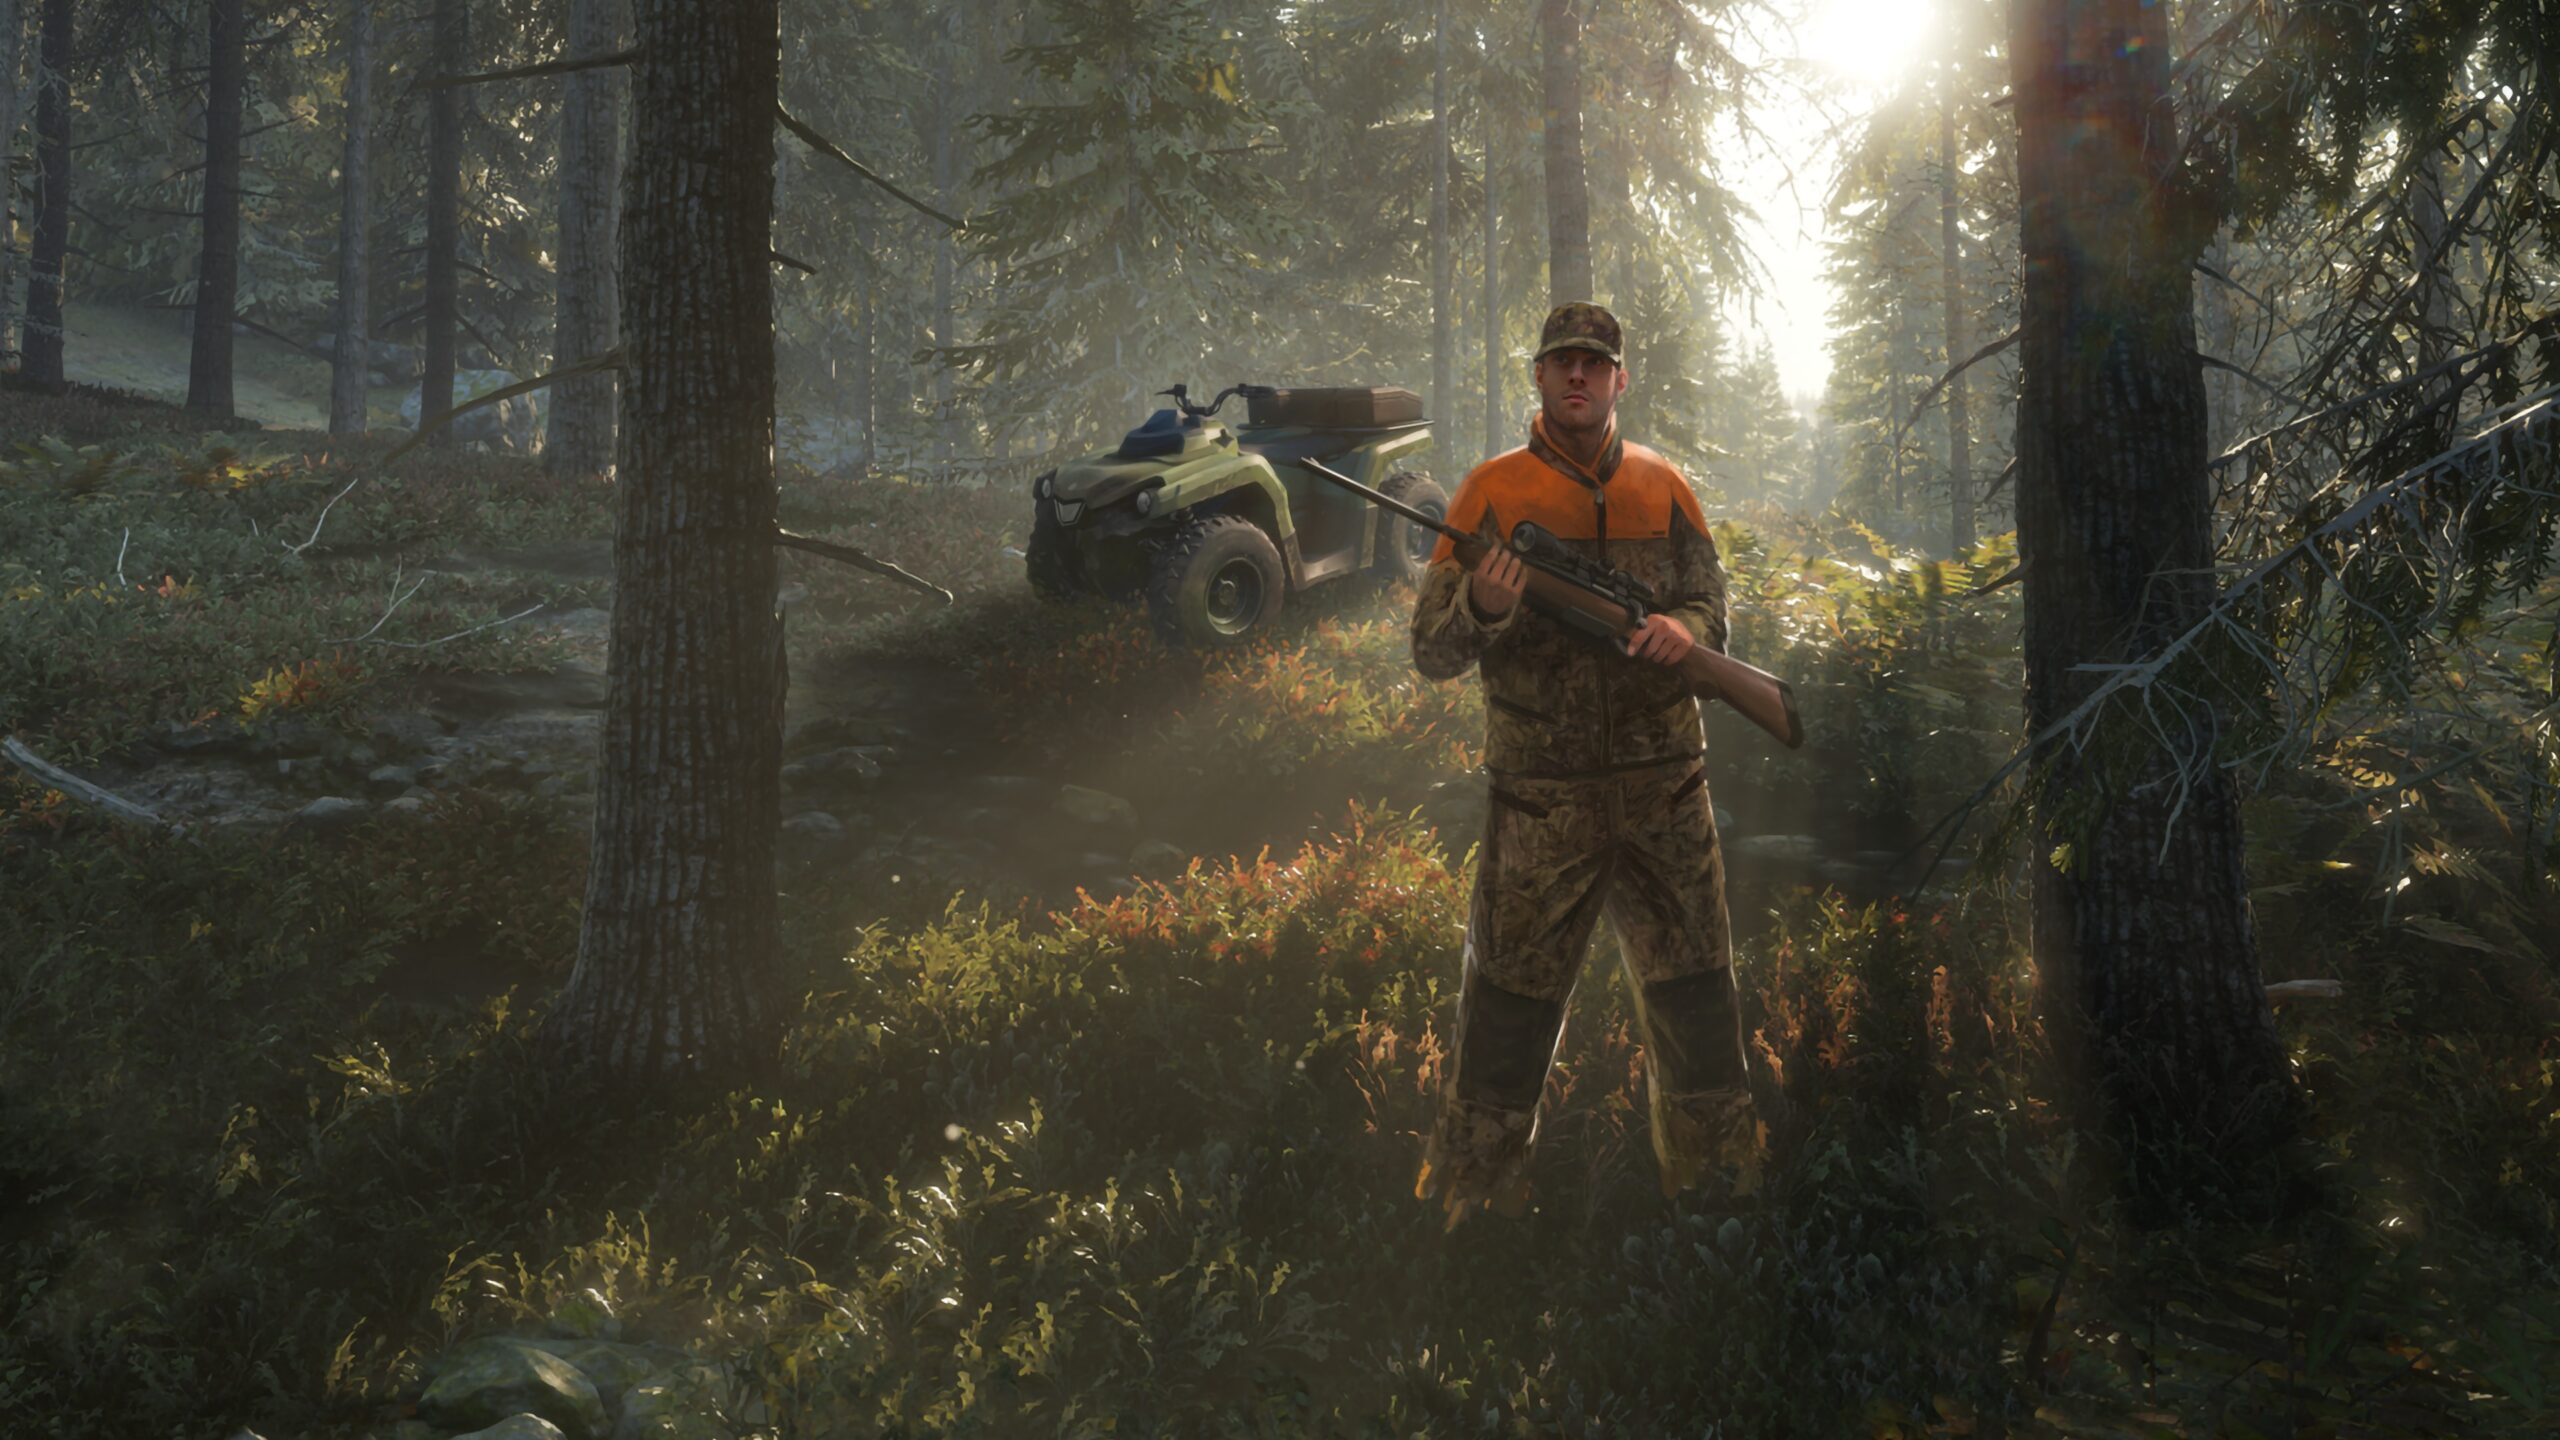 Call of the wild epic games. Игра the Hunter Call of the Wild. THEHUNTER: Call of the Wild лого. The Hunter Call of the Wild логотип. The Hunter Call of the Wild последняя версия.